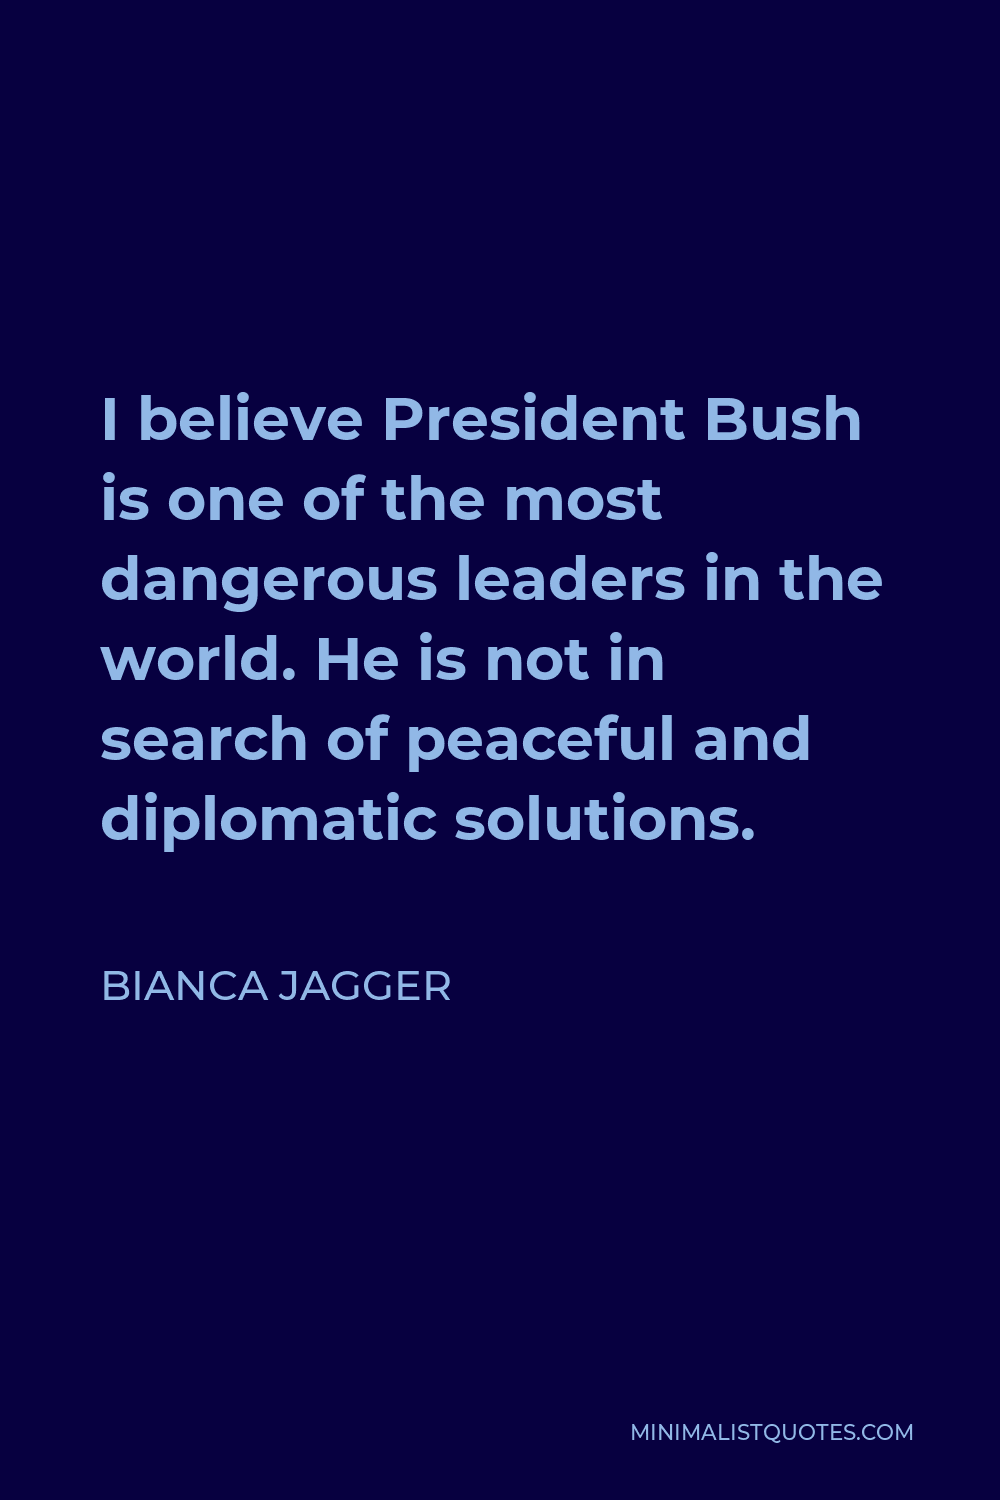 Bianca Jagger Quote - I believe President Bush is one of the most dangerous leaders in the world. He is not in search of peaceful and diplomatic solutions.